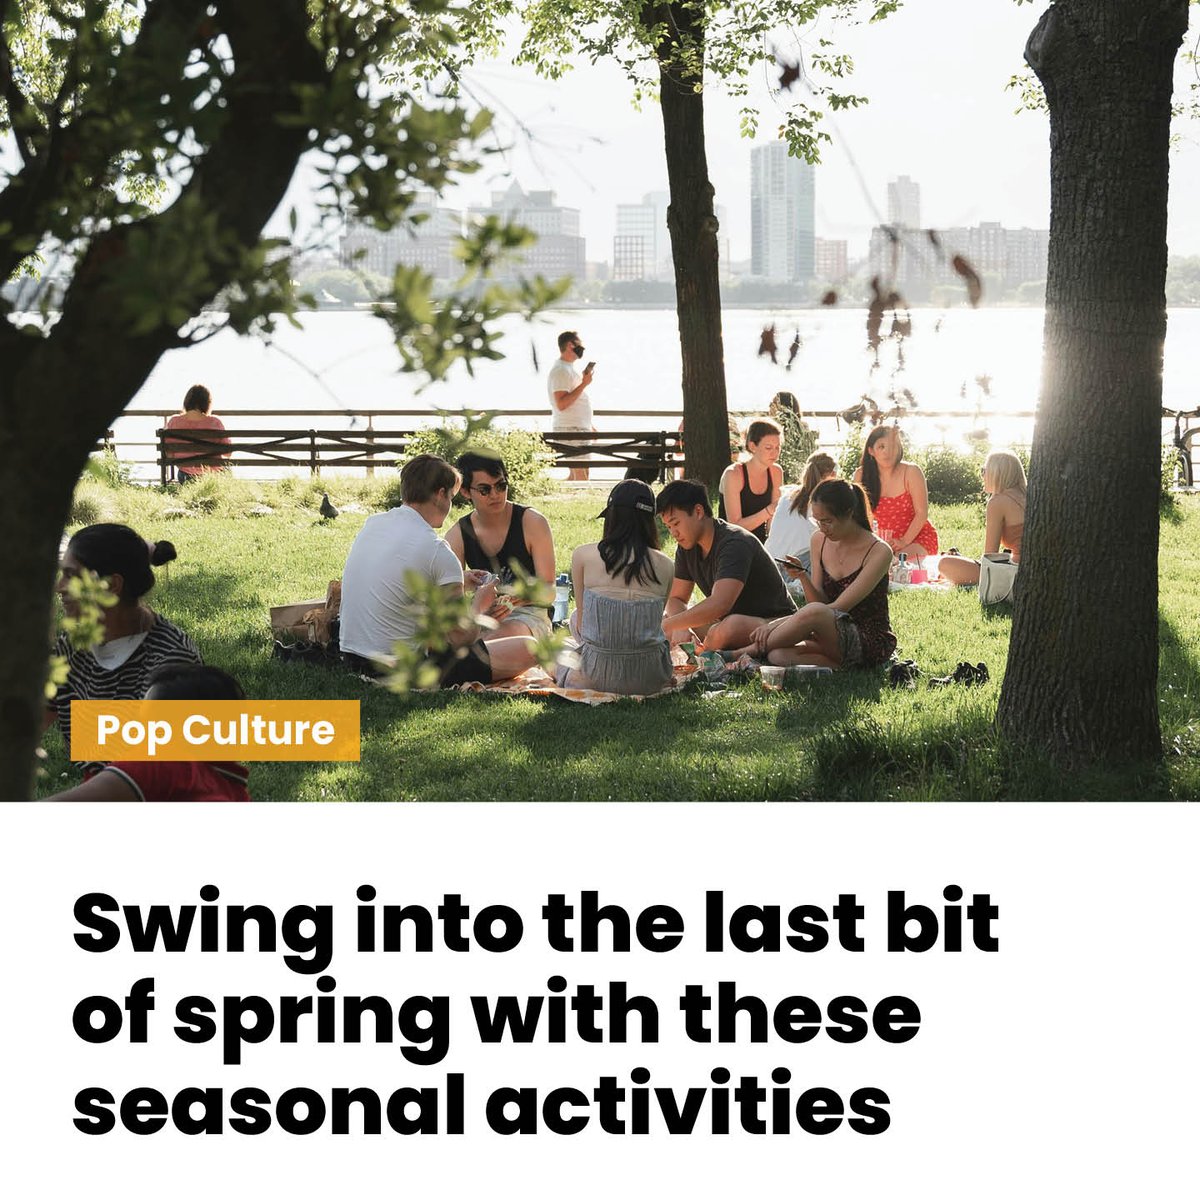 #POPCULTURE: Swing into the last bit of spring with these seasonal activities

Whether it’s walking in nature or having a picnic, there’s many simple ways to enjoy the fresh air and clear skies

#SpringSeason #SpringActivities #MetroVancouver
ow.ly/v7CY50S2zTv